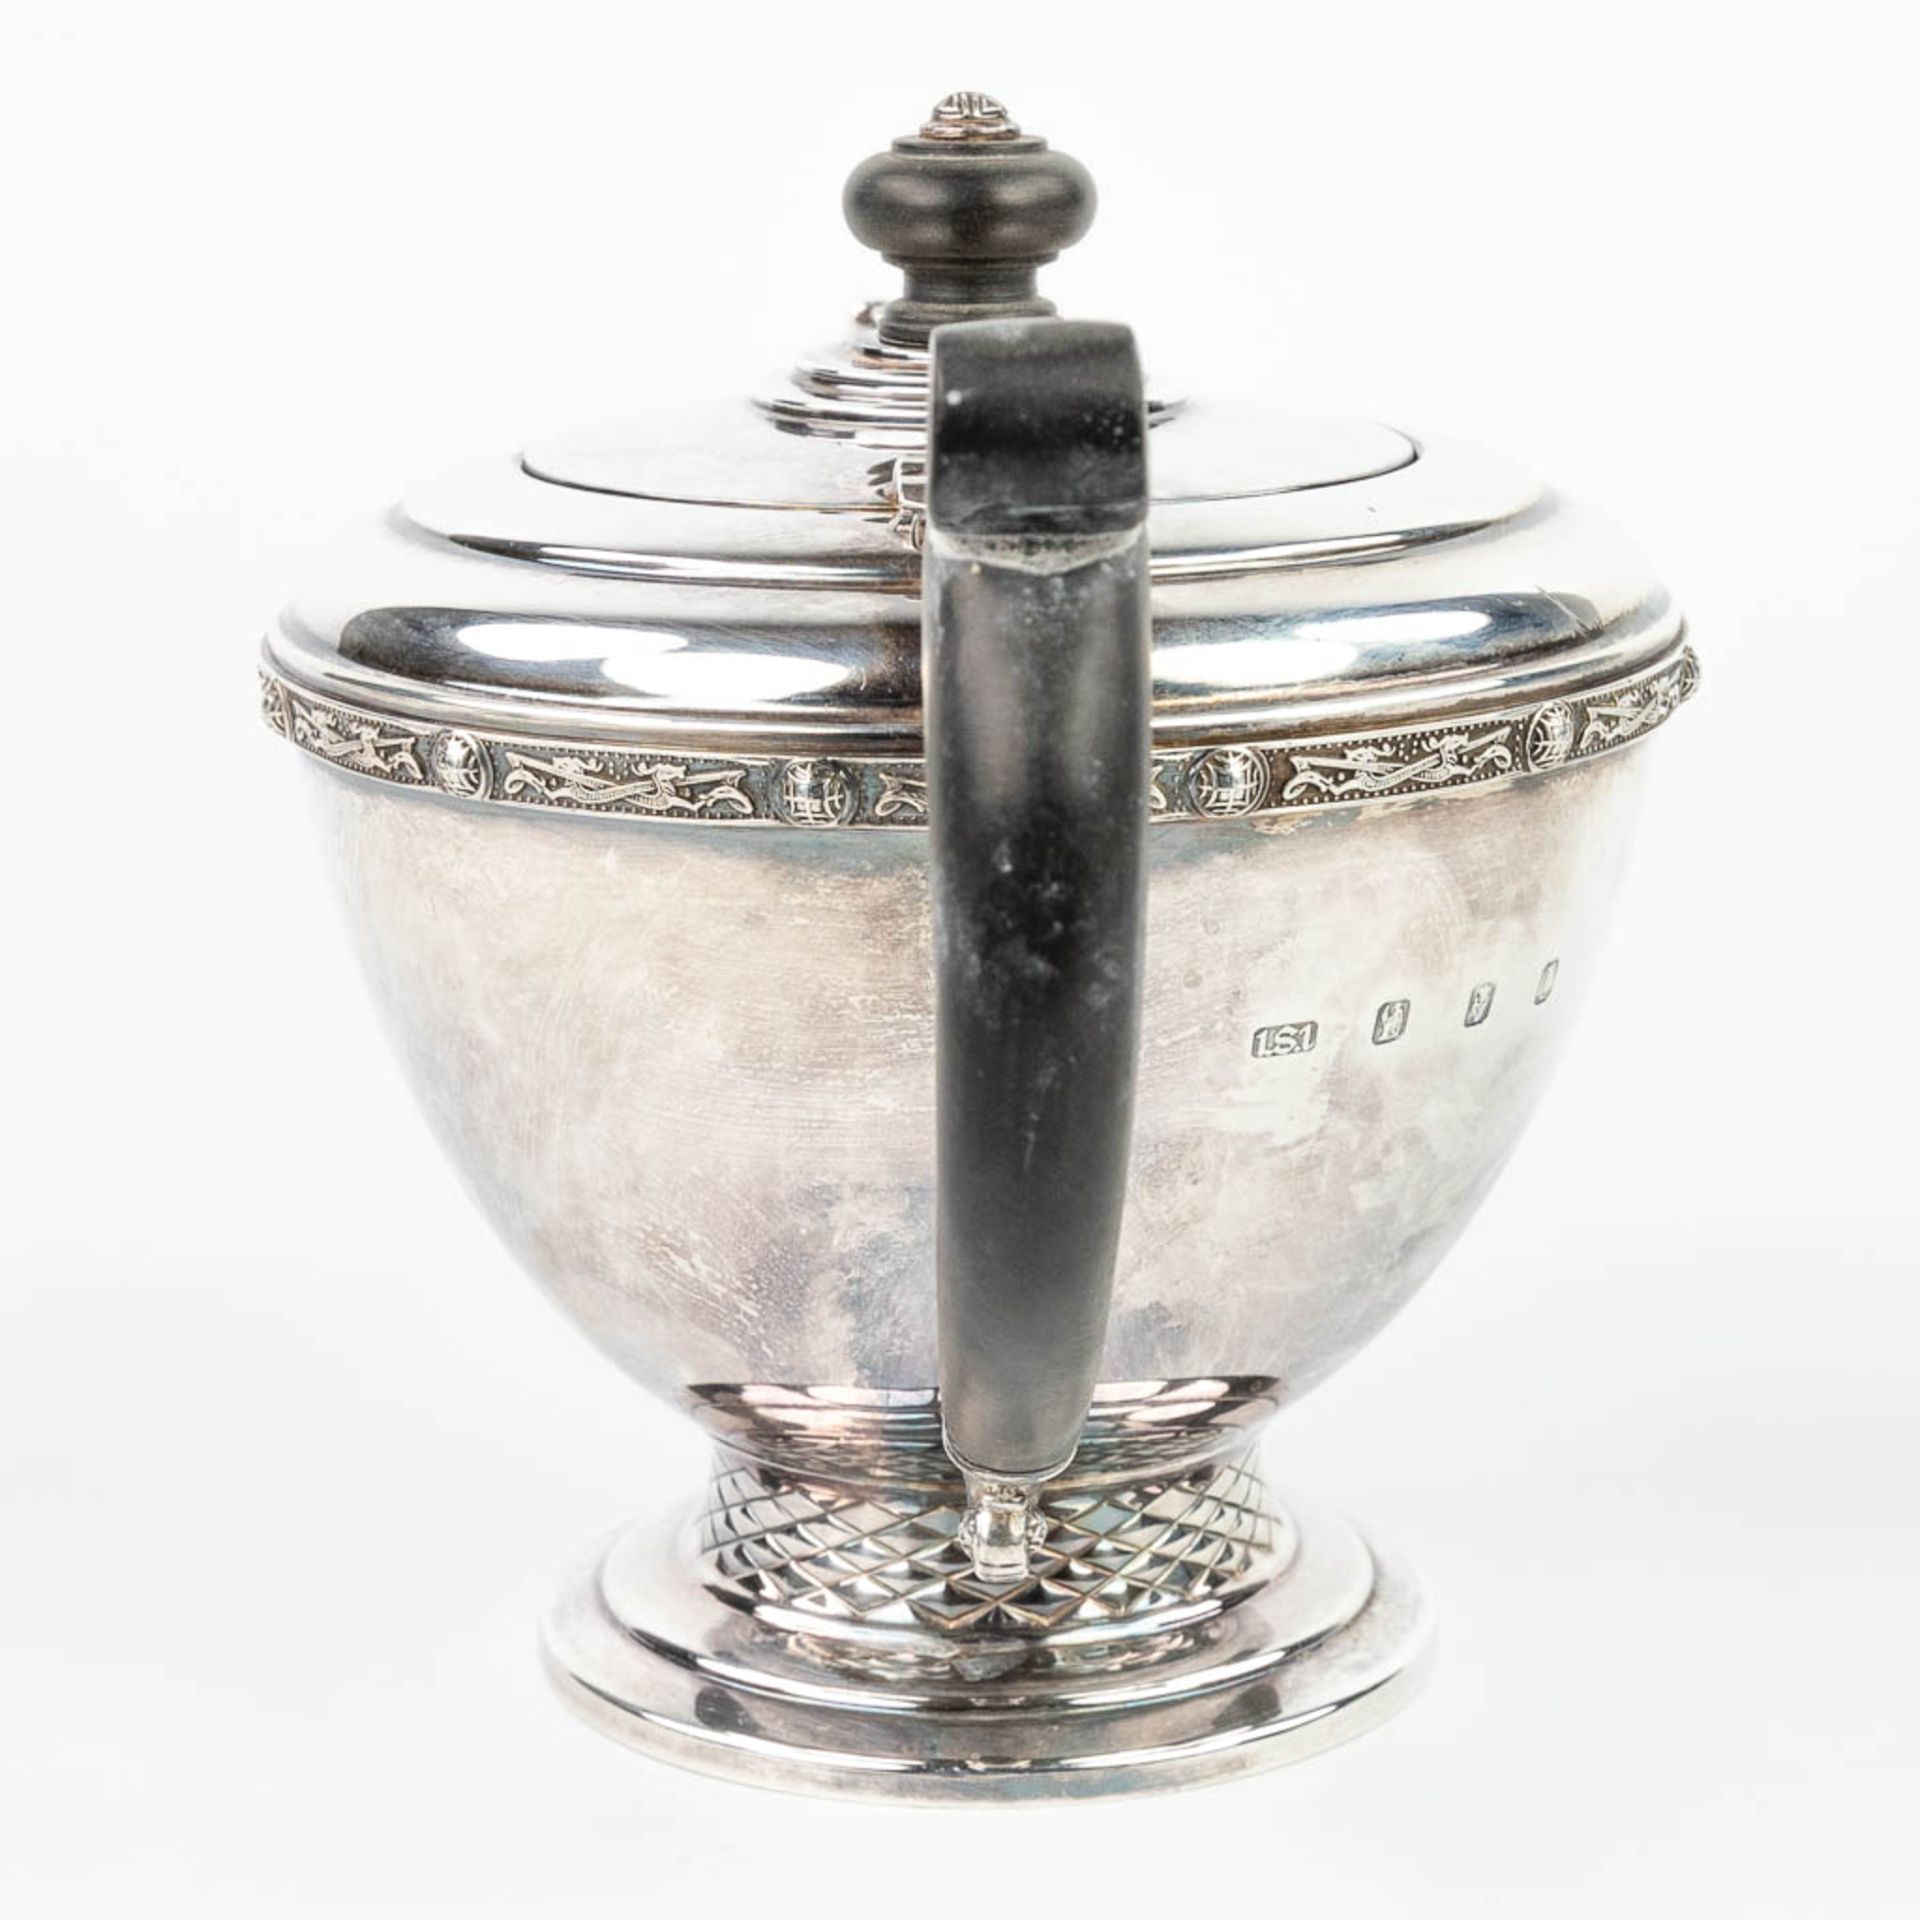 A fine silver teapot with ebony handles and made in Ireland, 1977. (H:16,5cm) - Image 3 of 18